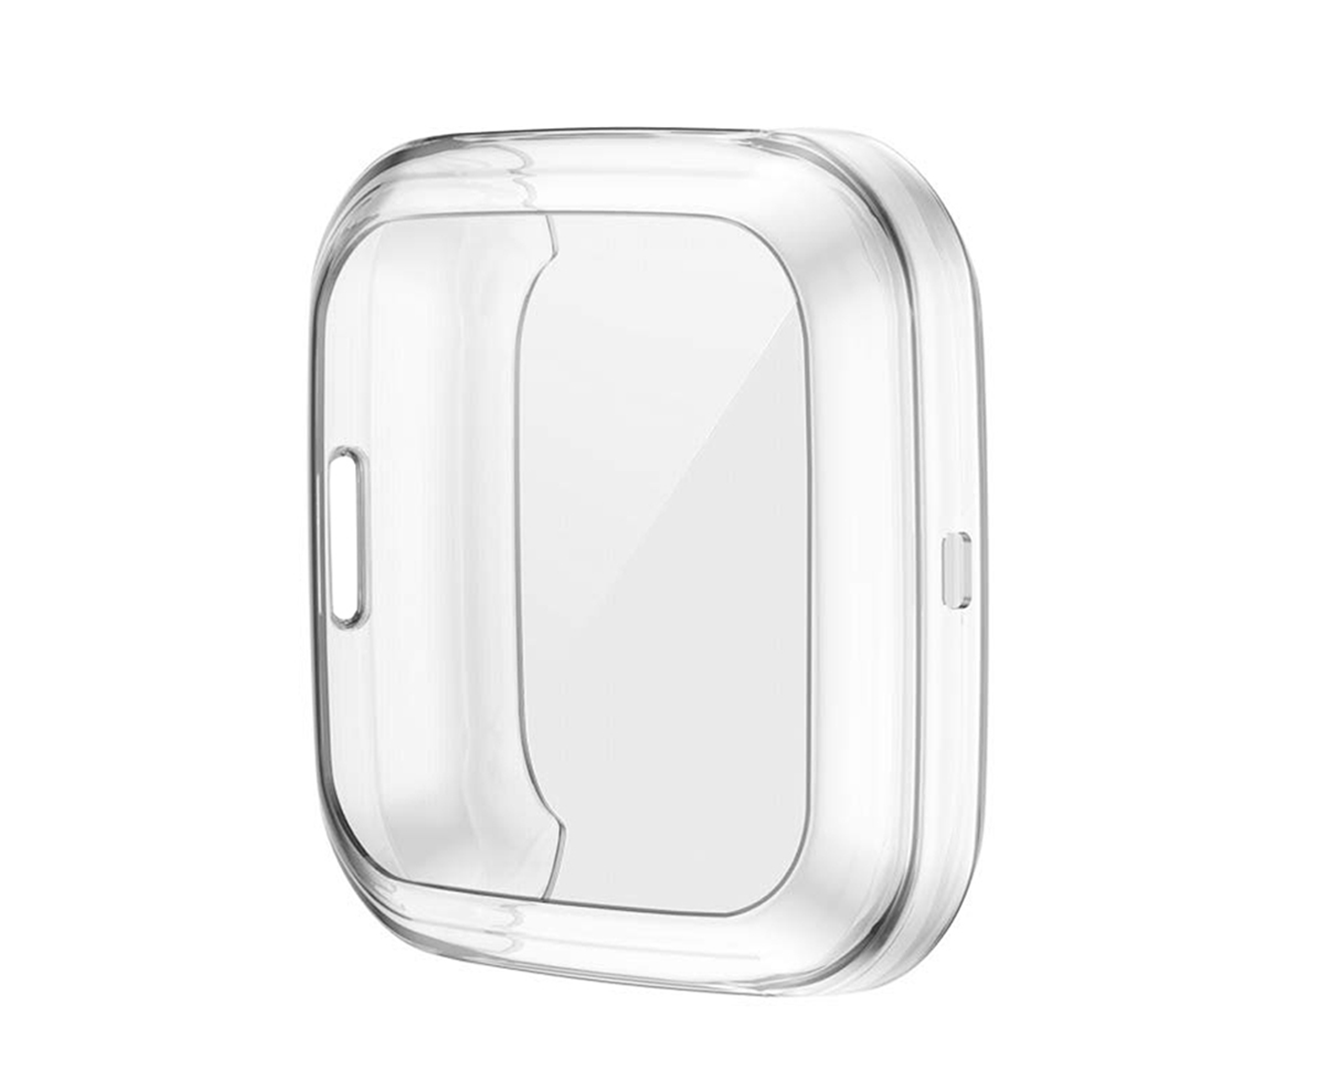 TPU Shell Case Screen Protector Frame Cover Bumper for Fitbit Versa 2 Watch TPU Protect Protective Durable Housing-White